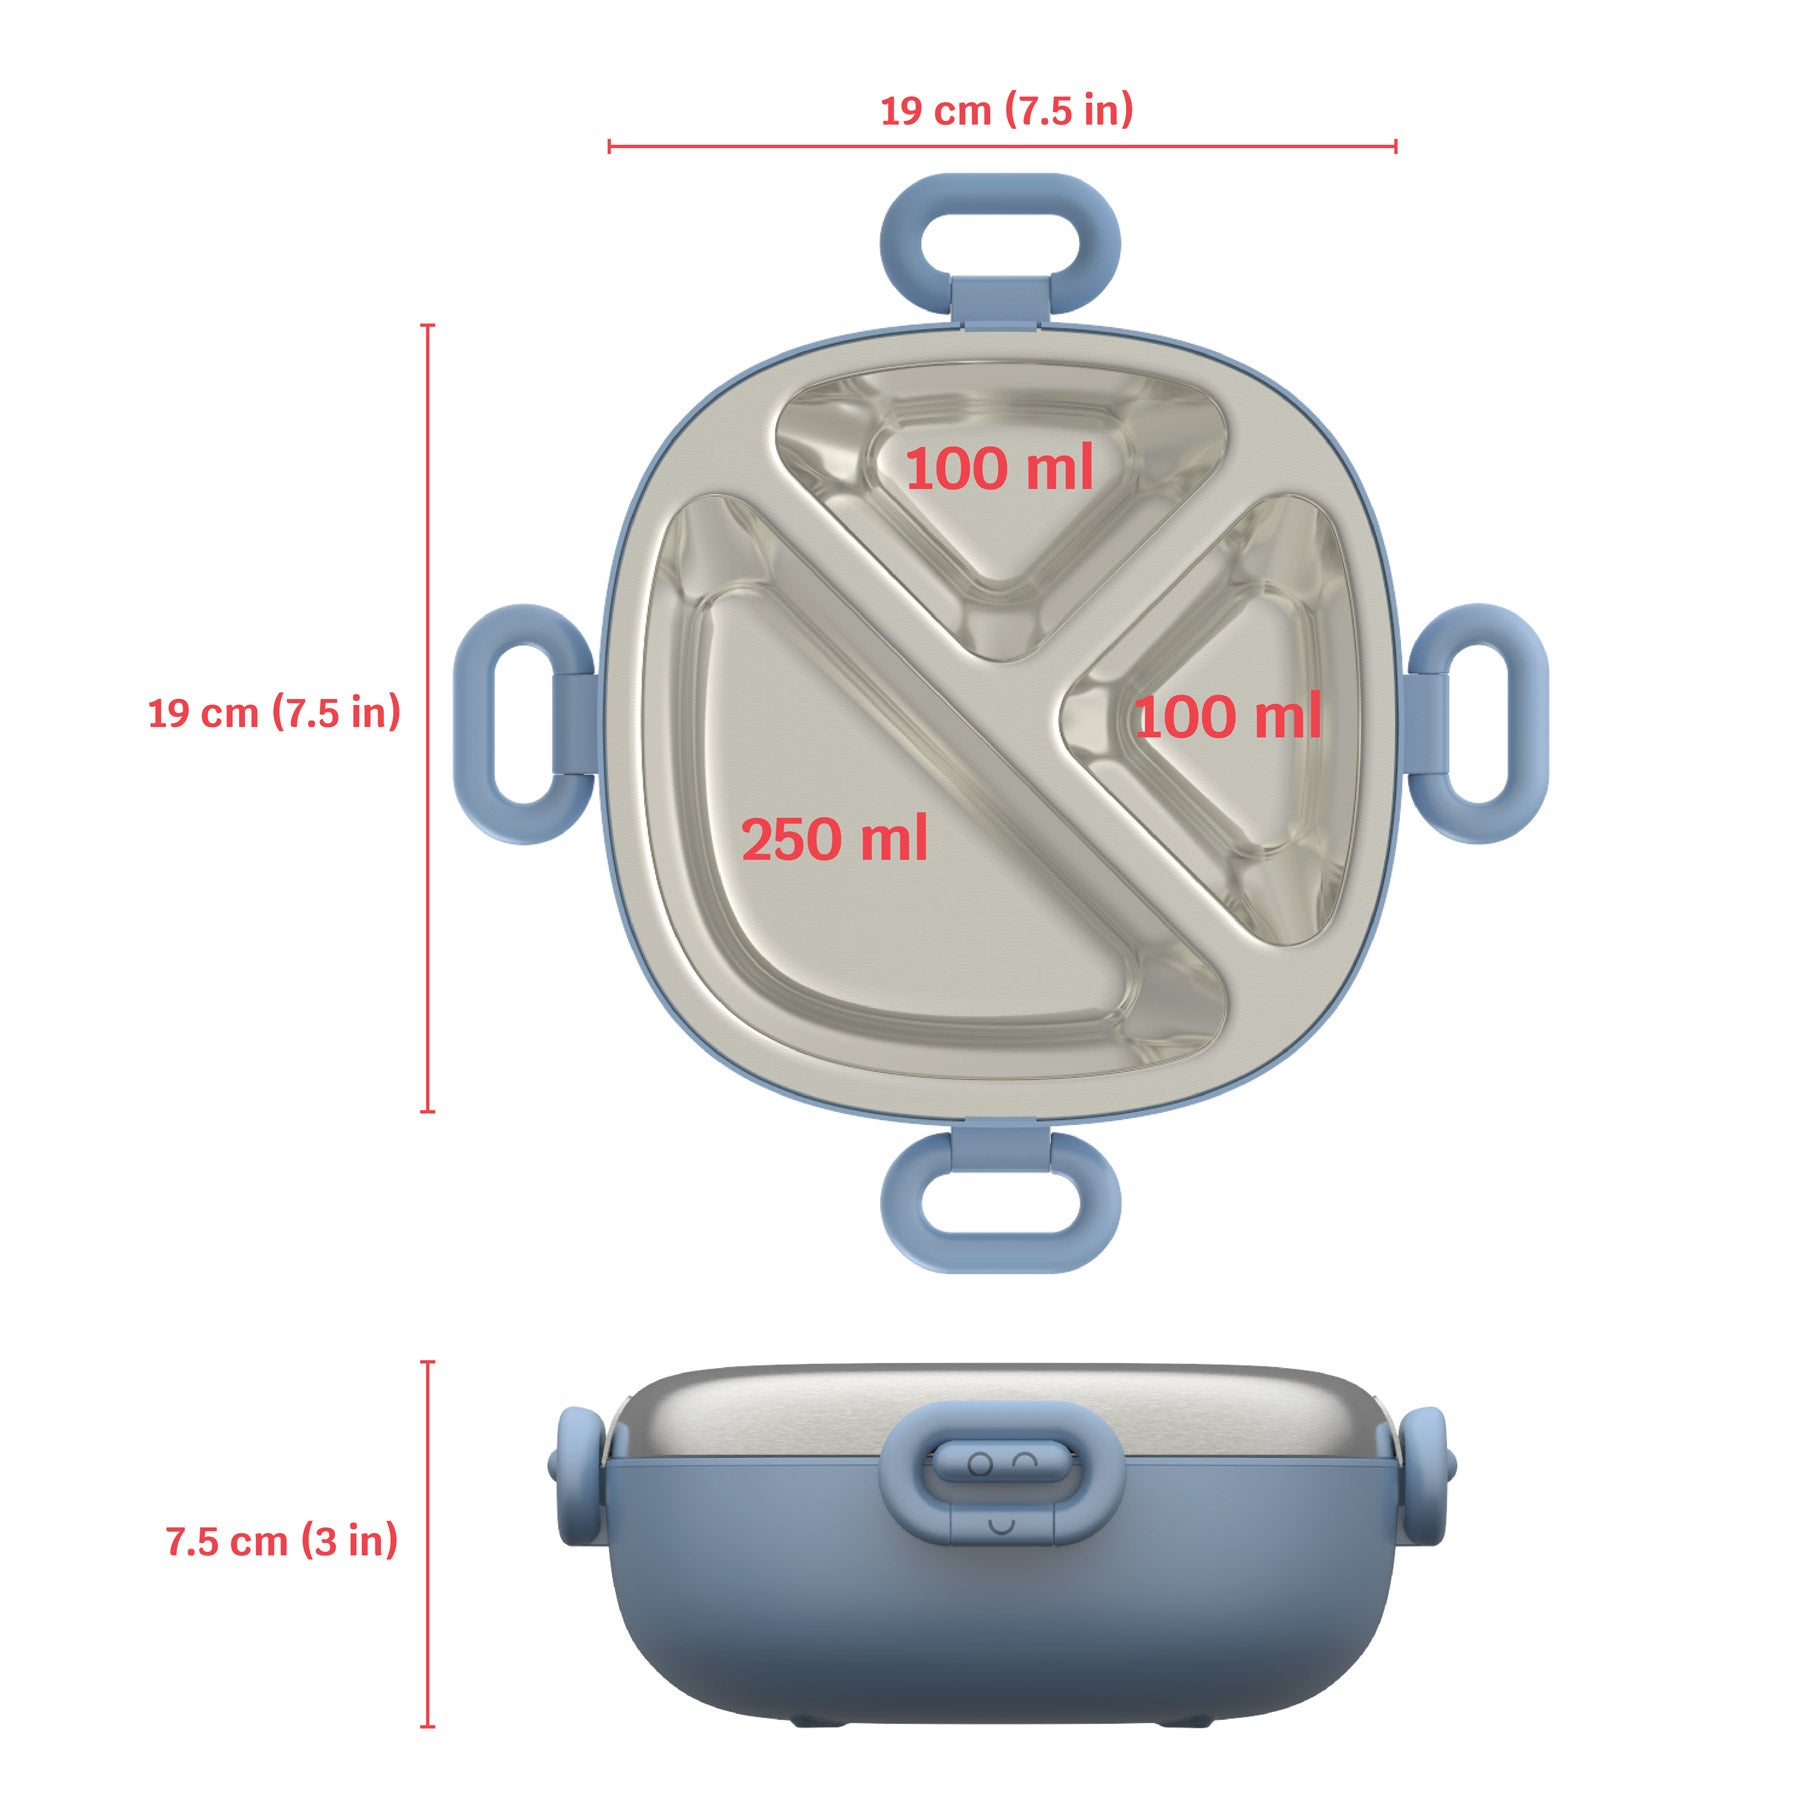 Dimensional view of Winck stainless steel bento box, measuring 19 cm in width and length with a depth of 7.5 cm, featuring compartments with capacities of 100 ml each and a larger 250 ml section, ideal size for kids lunches.